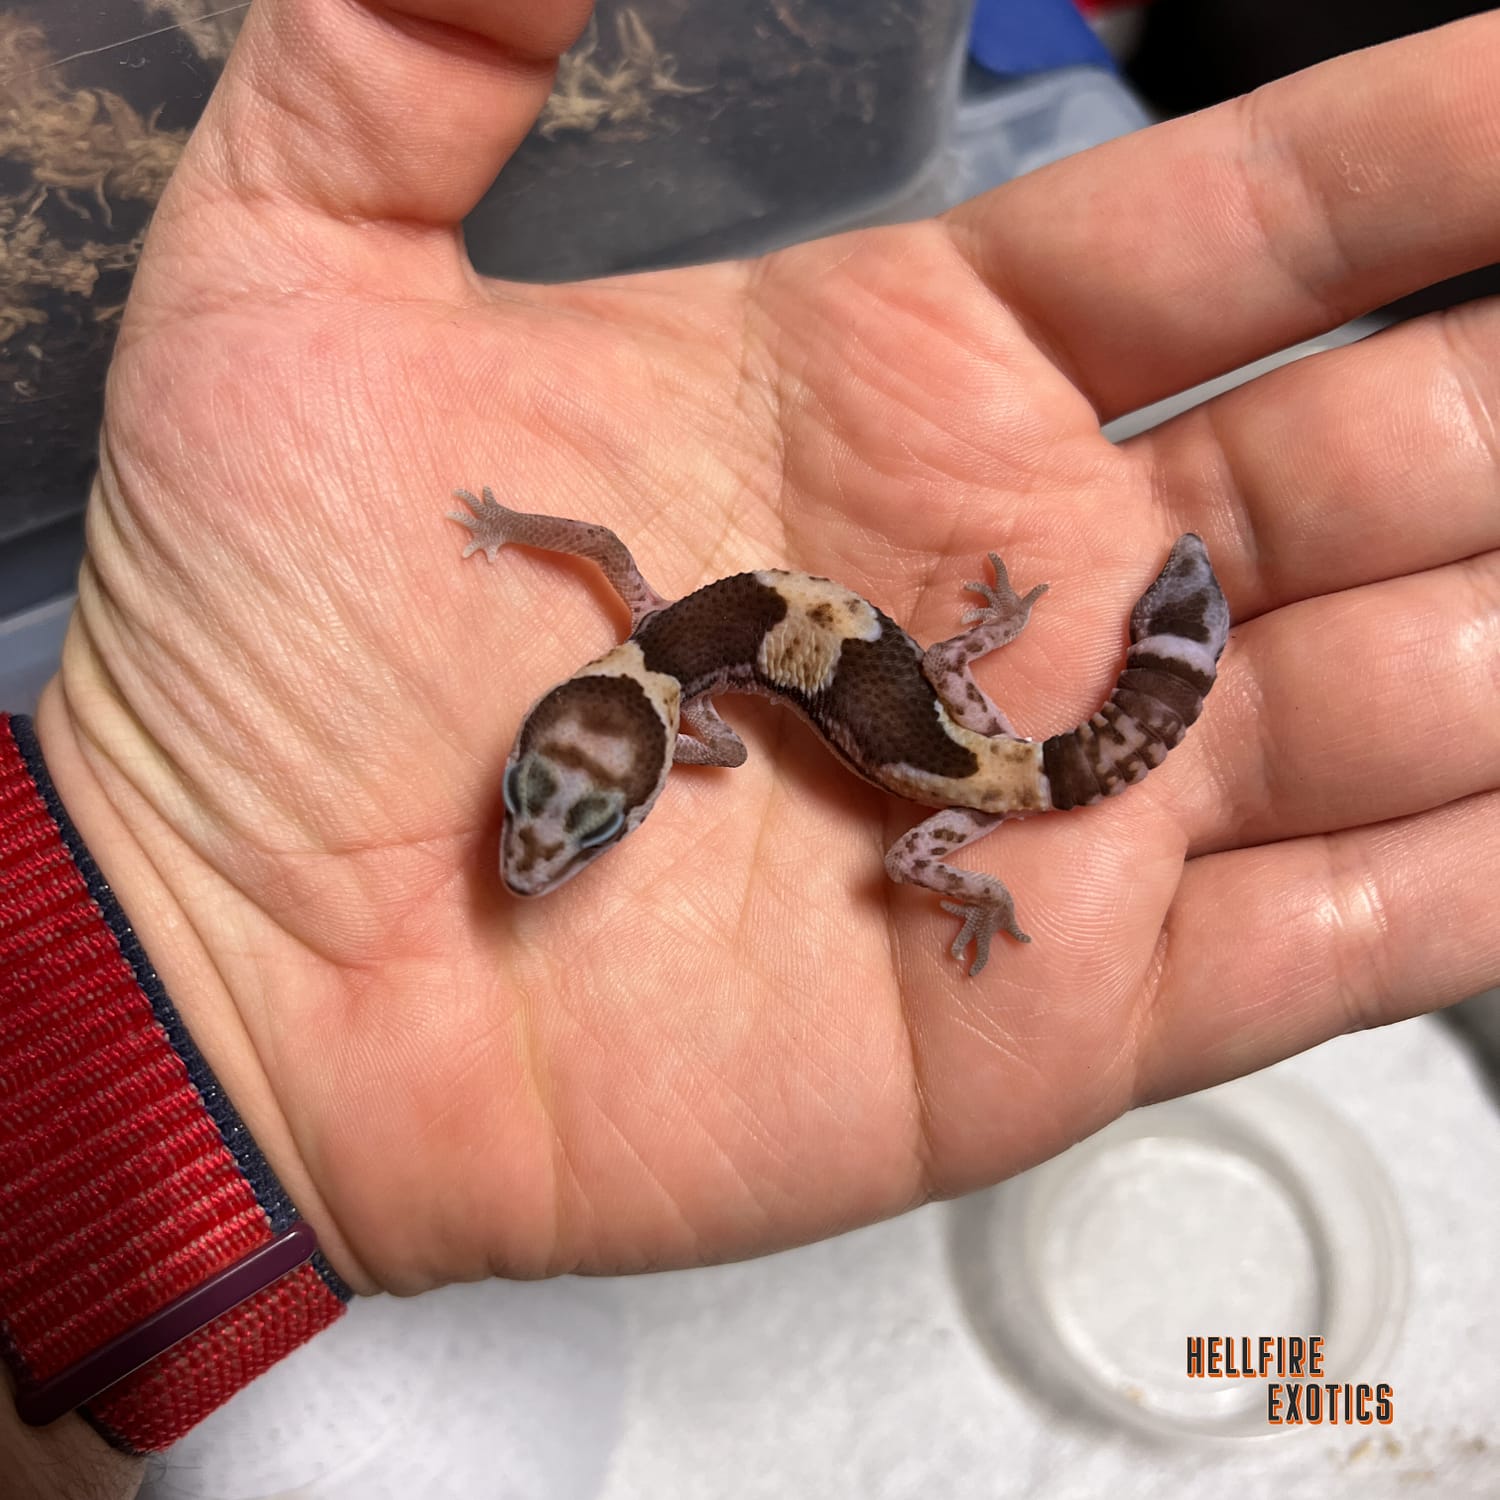 TSM "Stinger" Triple Het Ghost/Oreo/Patternless African Fat-Tailed Gecko by Hellfire Exotics